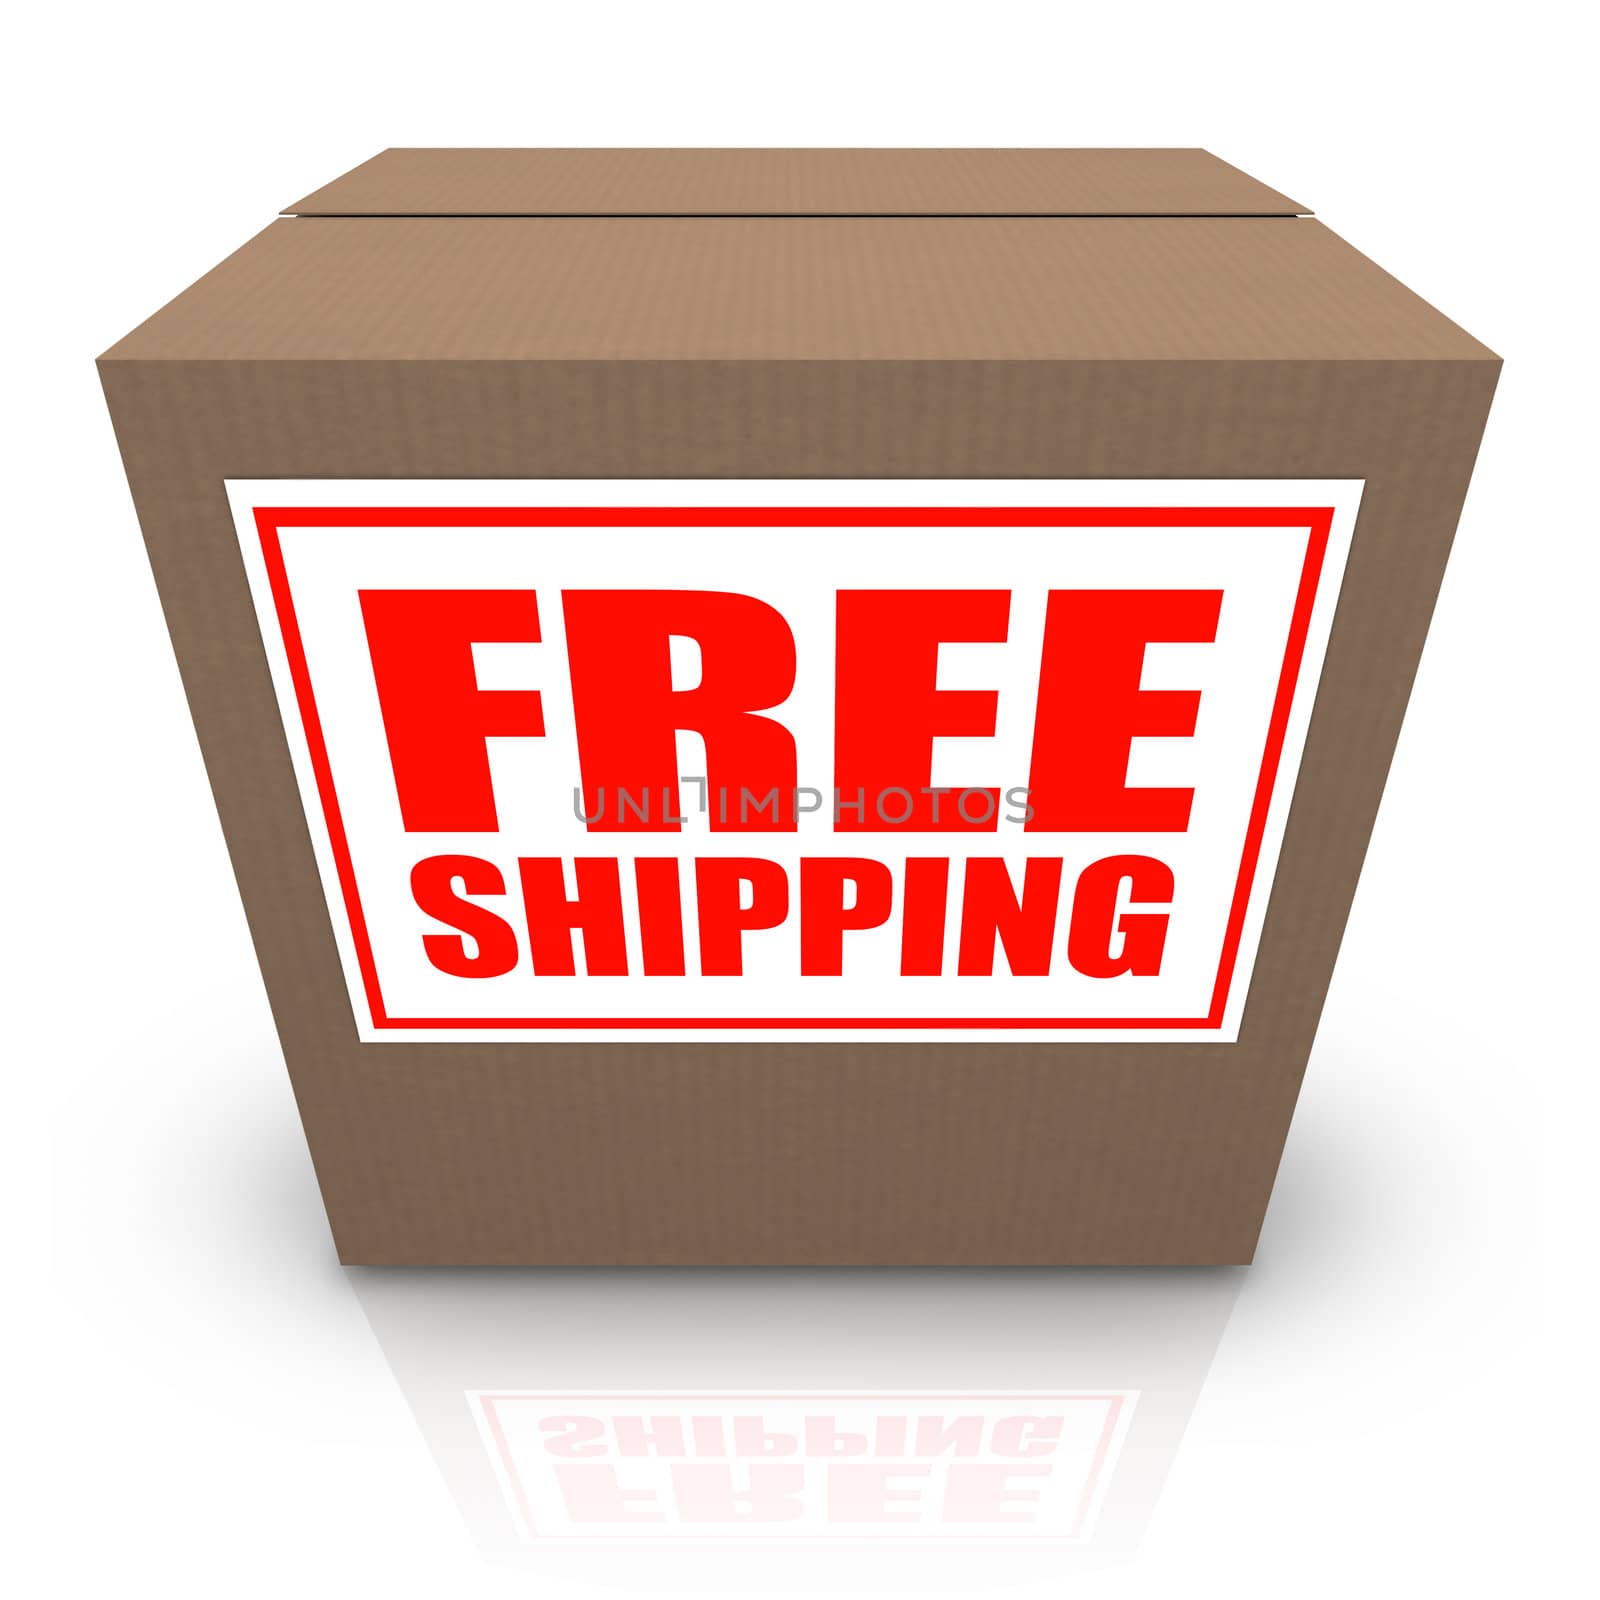 A brown cardboard box with a white sticker and red letters reading Free Shipping offering a special no cost shipment plan for your order of merchandise